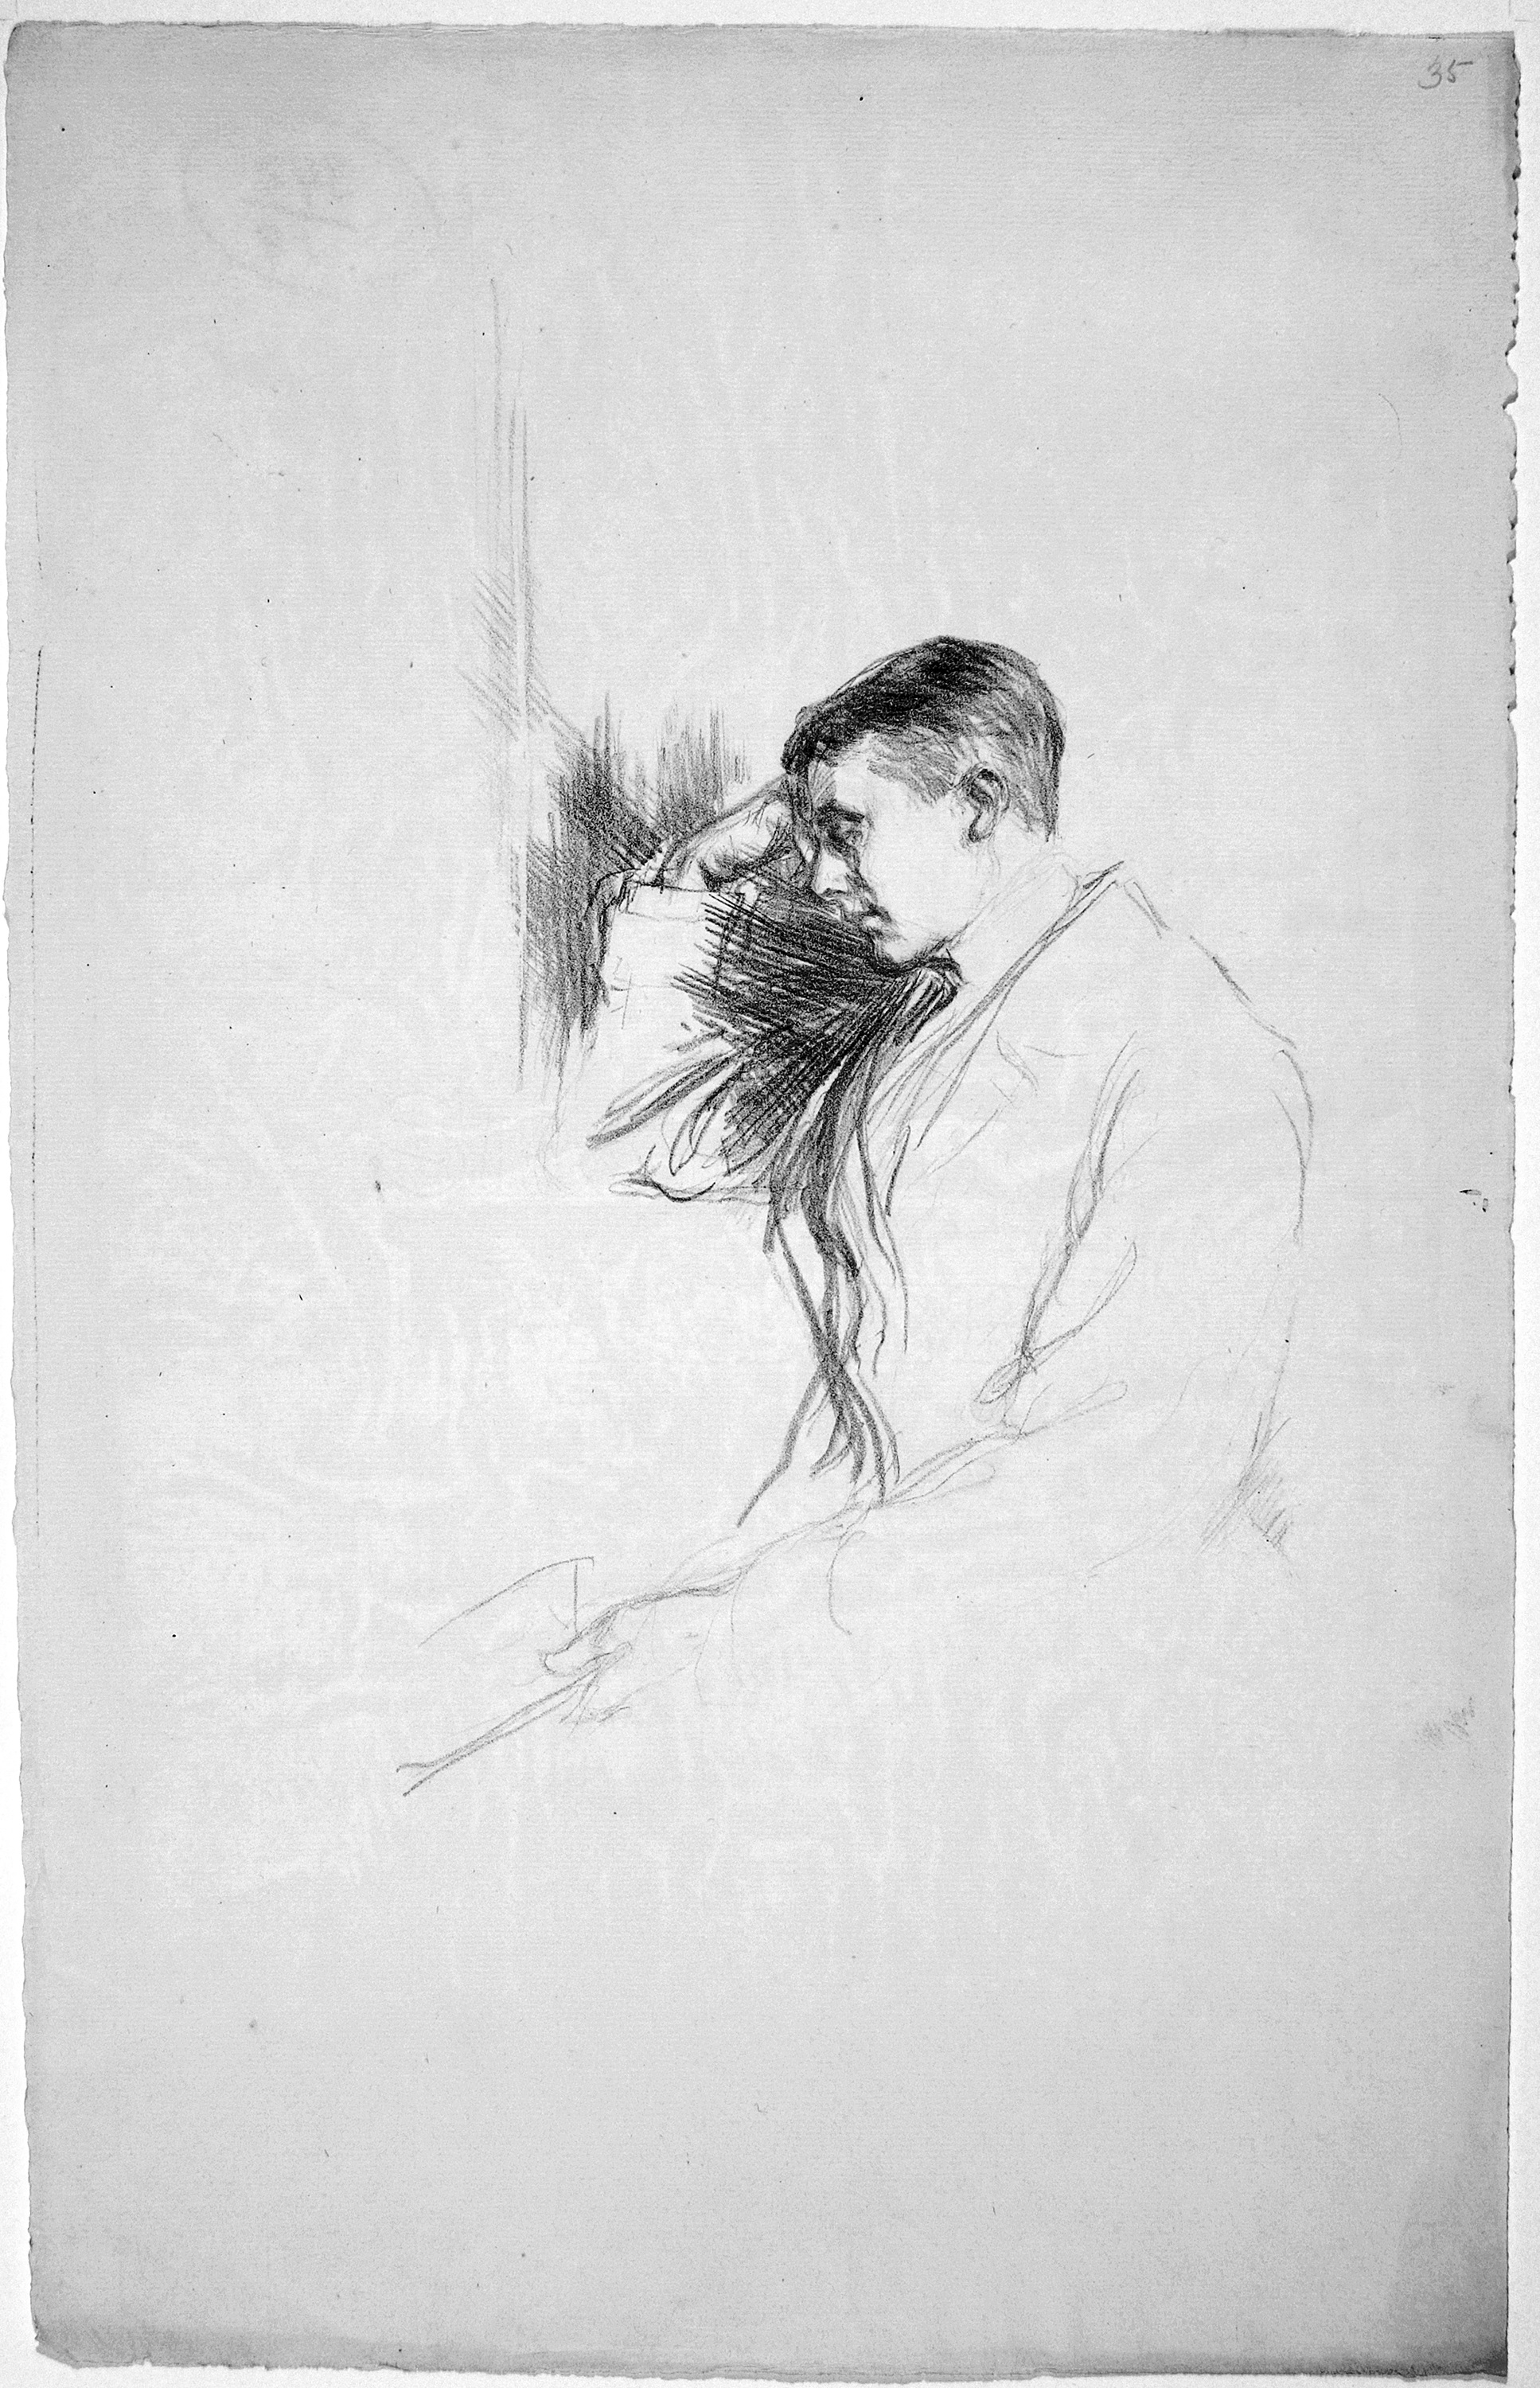 This image is a drawing of John Gray, his head and right arm are detailed, and the rest of the image is loosely sketched, fading away further down the page. He is leaning on his right elbow, perhaps by a window, his fist to his forehead and eyes shut. In his left hand is a book, loosely held. Straight dark lines fill the space between his head and arm, contrasting with the rest of the sketch. His hair is combed to the side, it is dark on top and grey on the bottom. He is wearing a heavy overcoat, white shirt sleeves are visible.